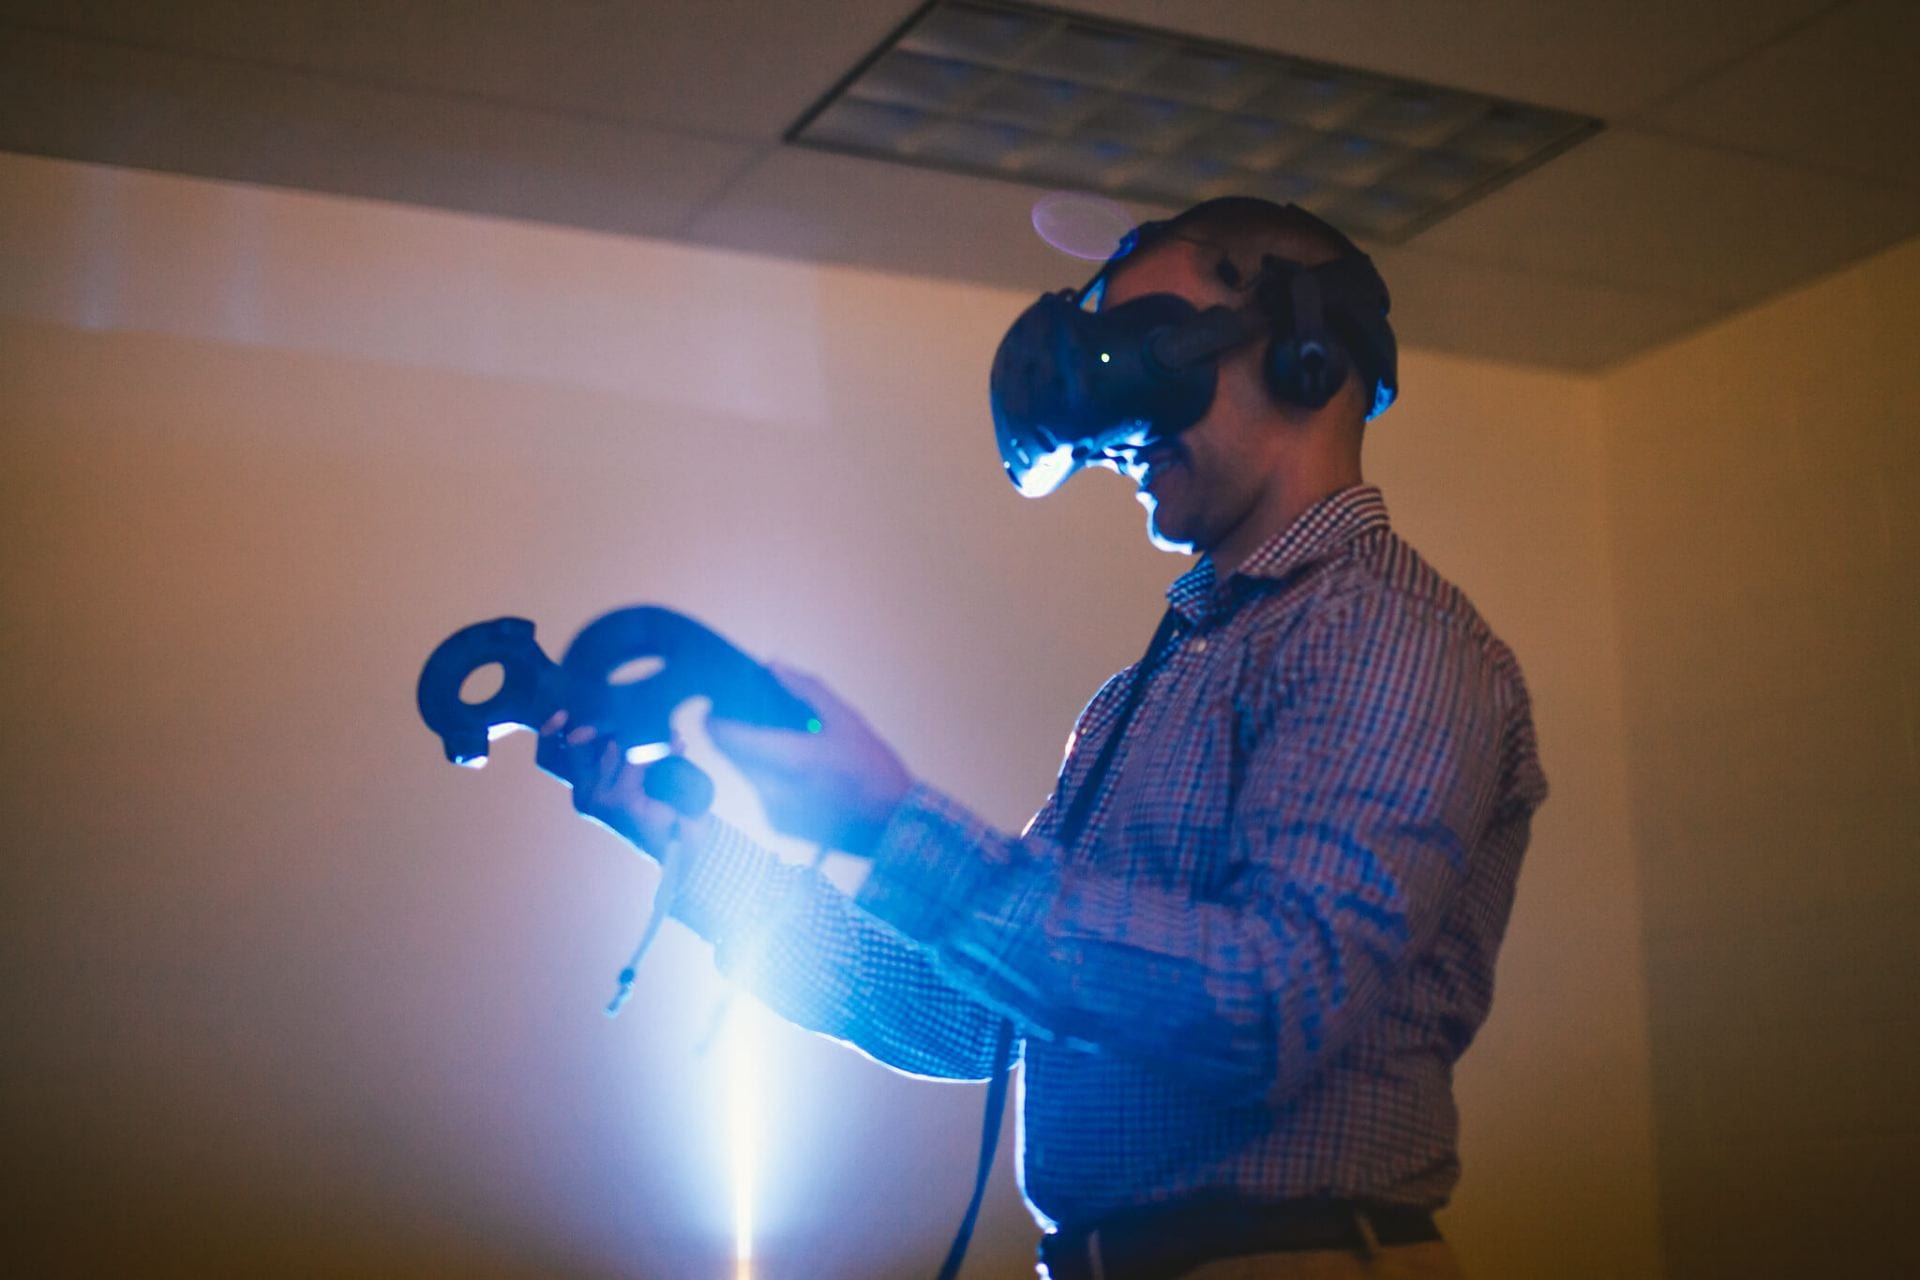 Center For Immersive Experiences Provides The University Community